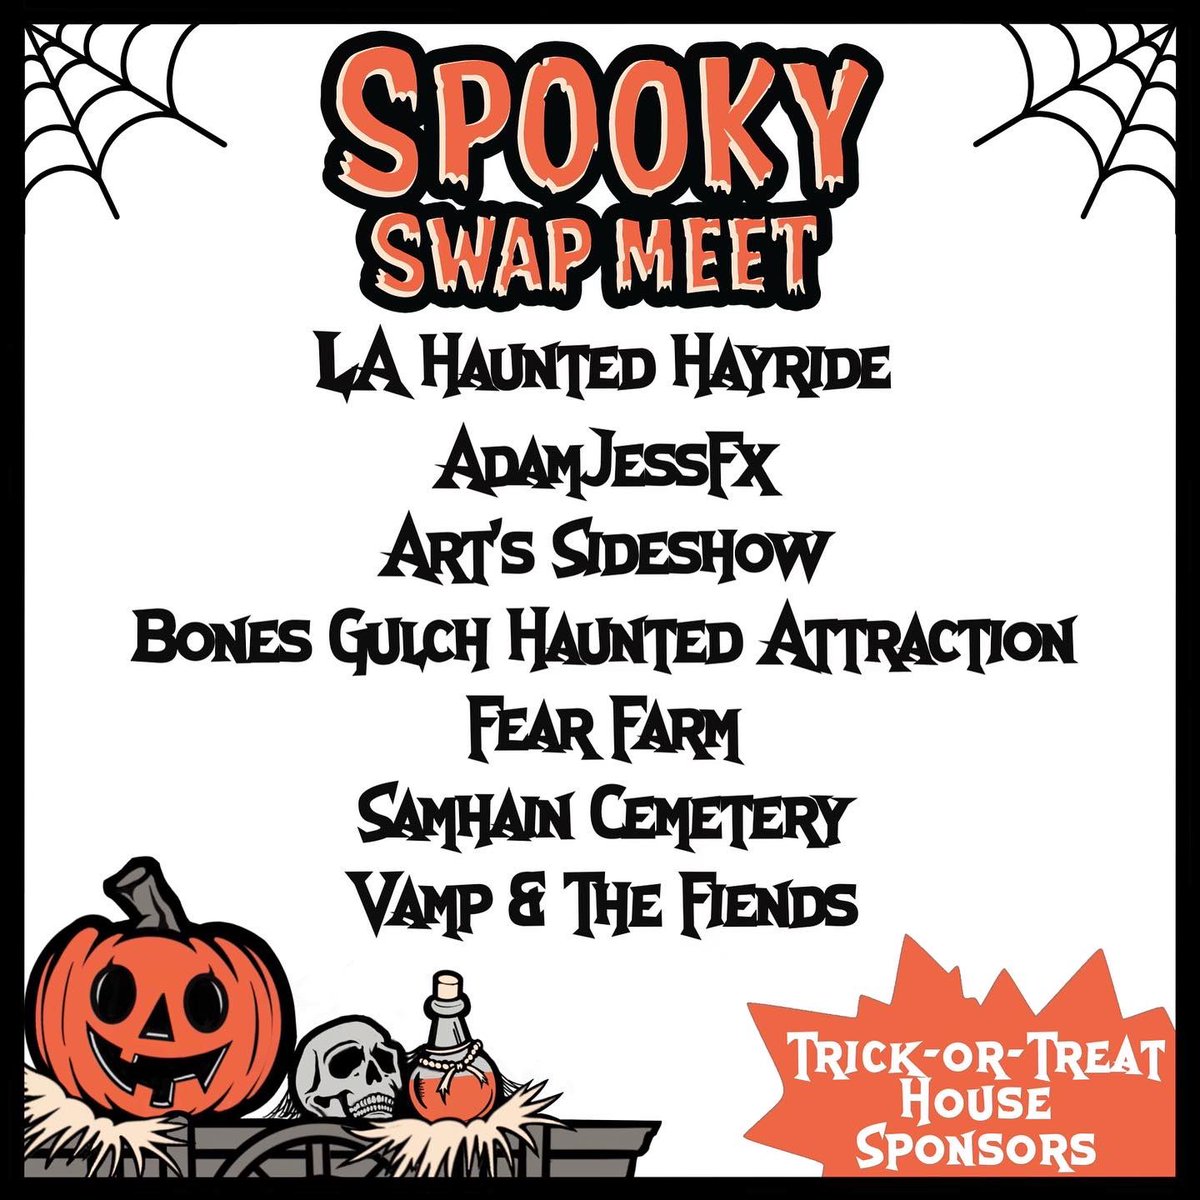 @spookyswapmeet tickets on sale now! Time slots selling out. Don’t miss daytime trick or treating @Heritagesquarem, 50+ vendors selling new, gently used and vintage Halloween items, and haunted house facades! April 30 and May 1 2022. spookyswapmeet.com #spookyswapmeet